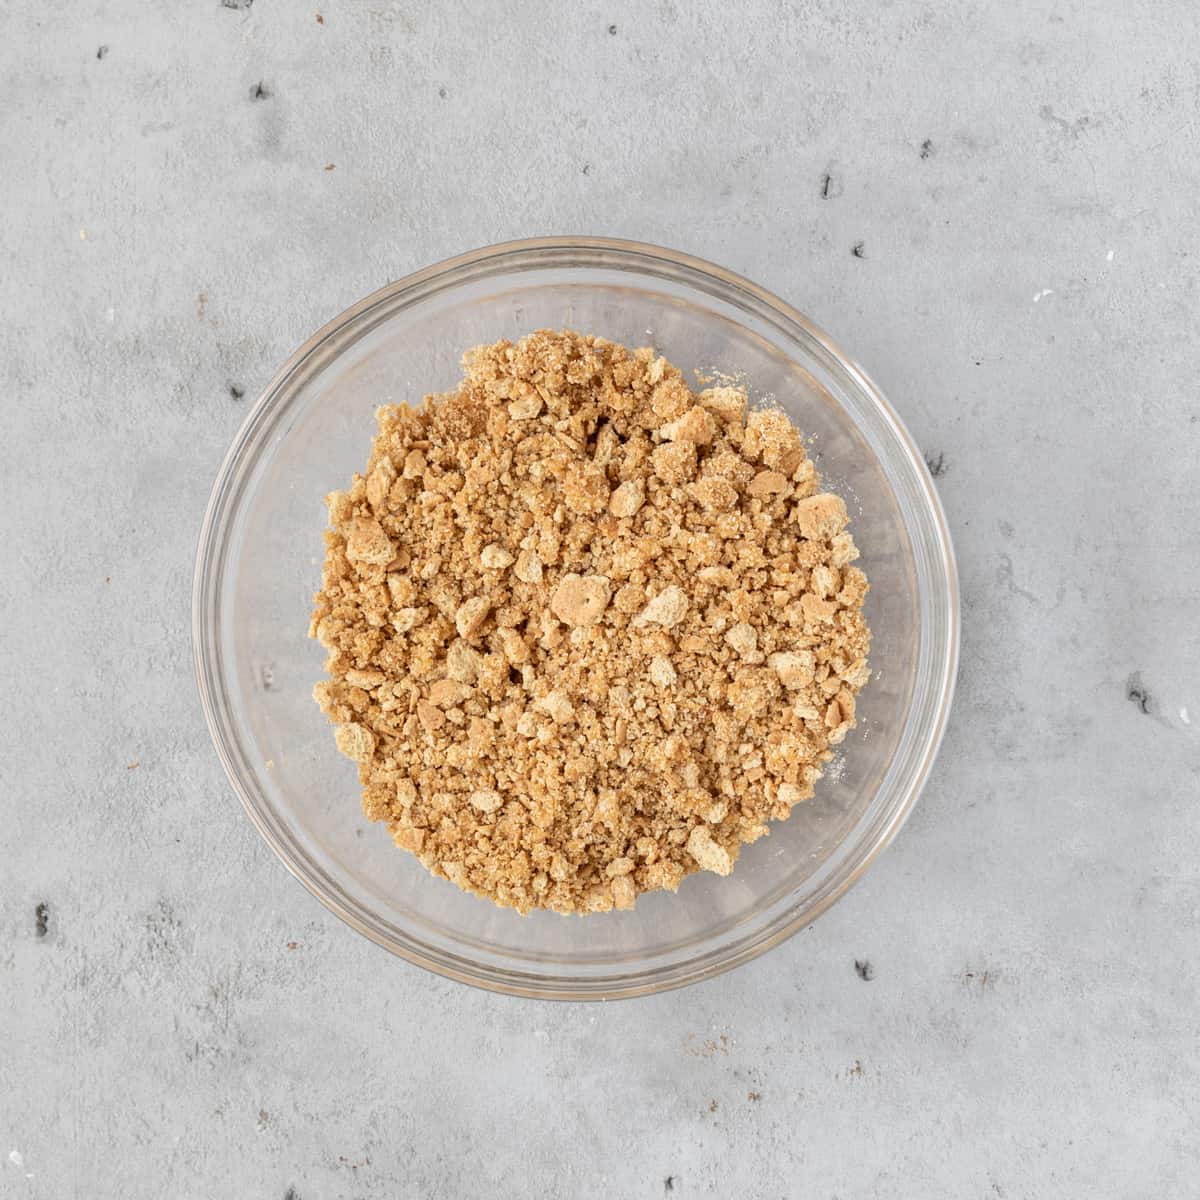 the graham cracker crust in a glass bowl on a grey background